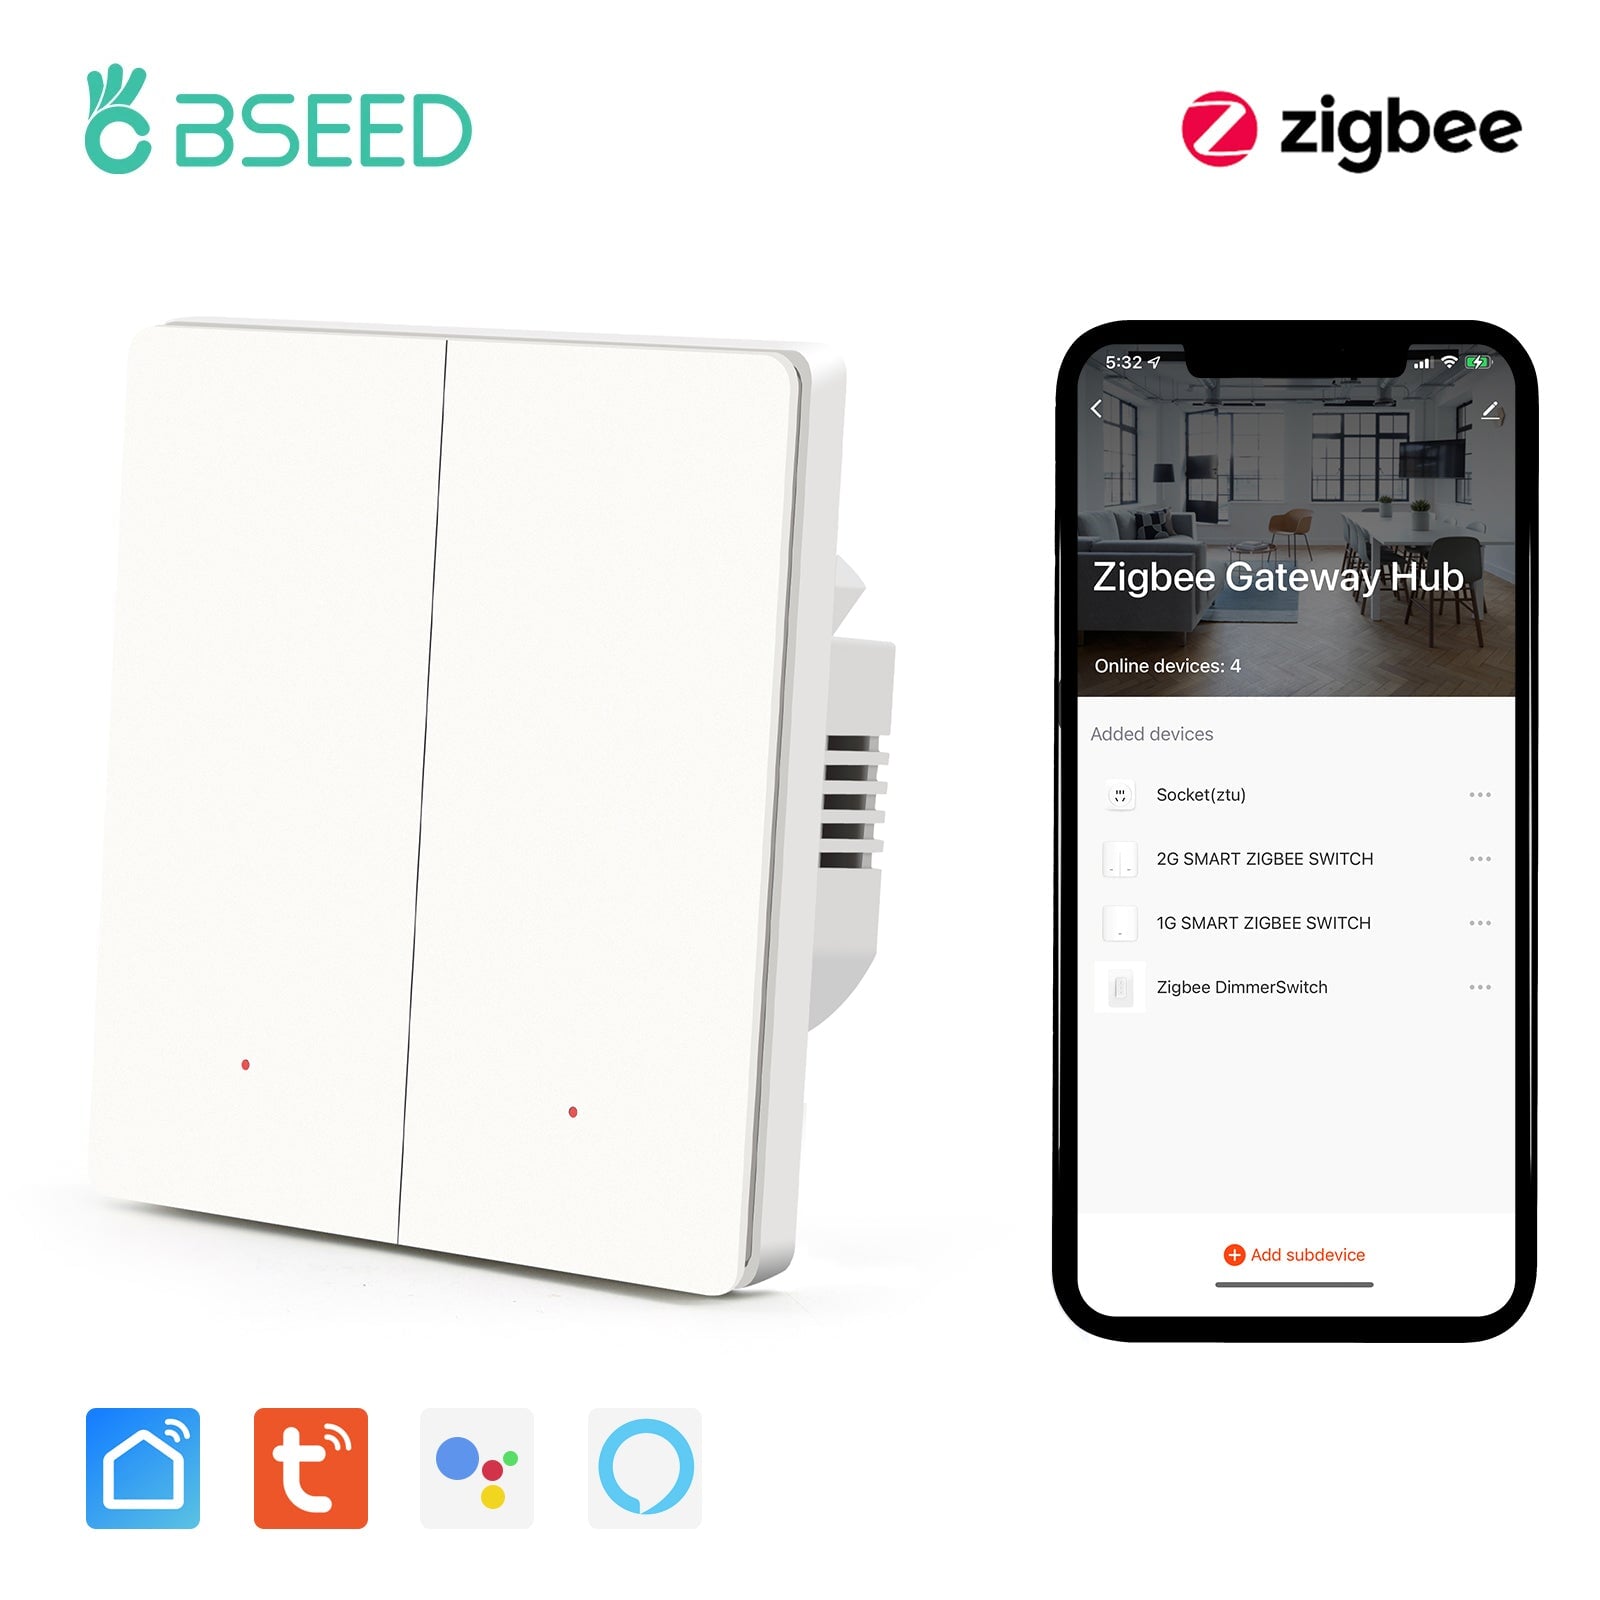 BSEED Zigbee Automatic Rebound Smart Wall Light Switches Neutral Switch Bseedswitch 